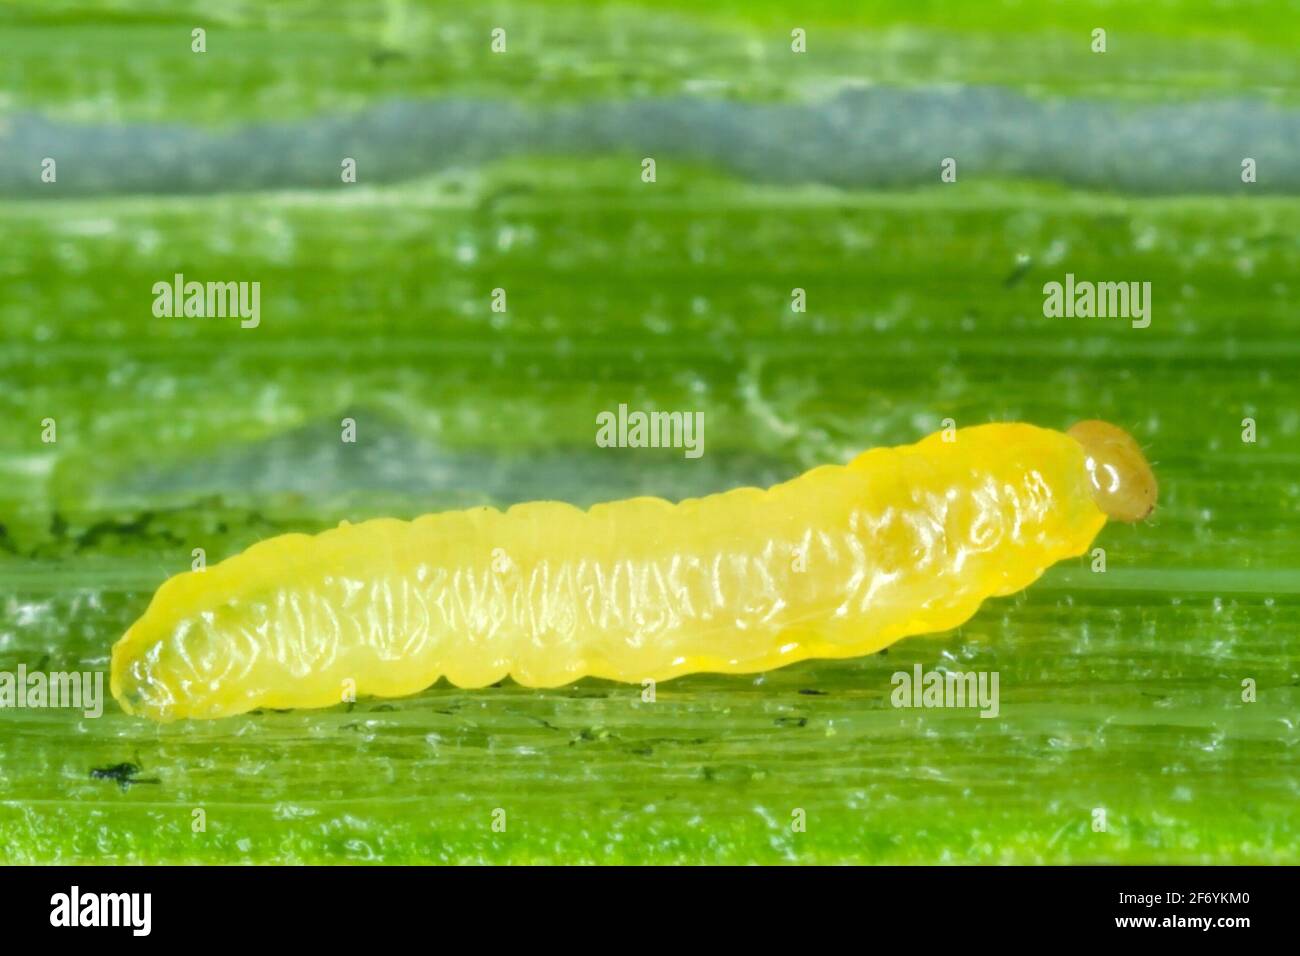 Caterpillar of leek moth or onion leaf miner Acrolepiopsis assectella family Acrolepiidae. It is Invasive species a pest of leek crops. Larvae feed on Stock Photo